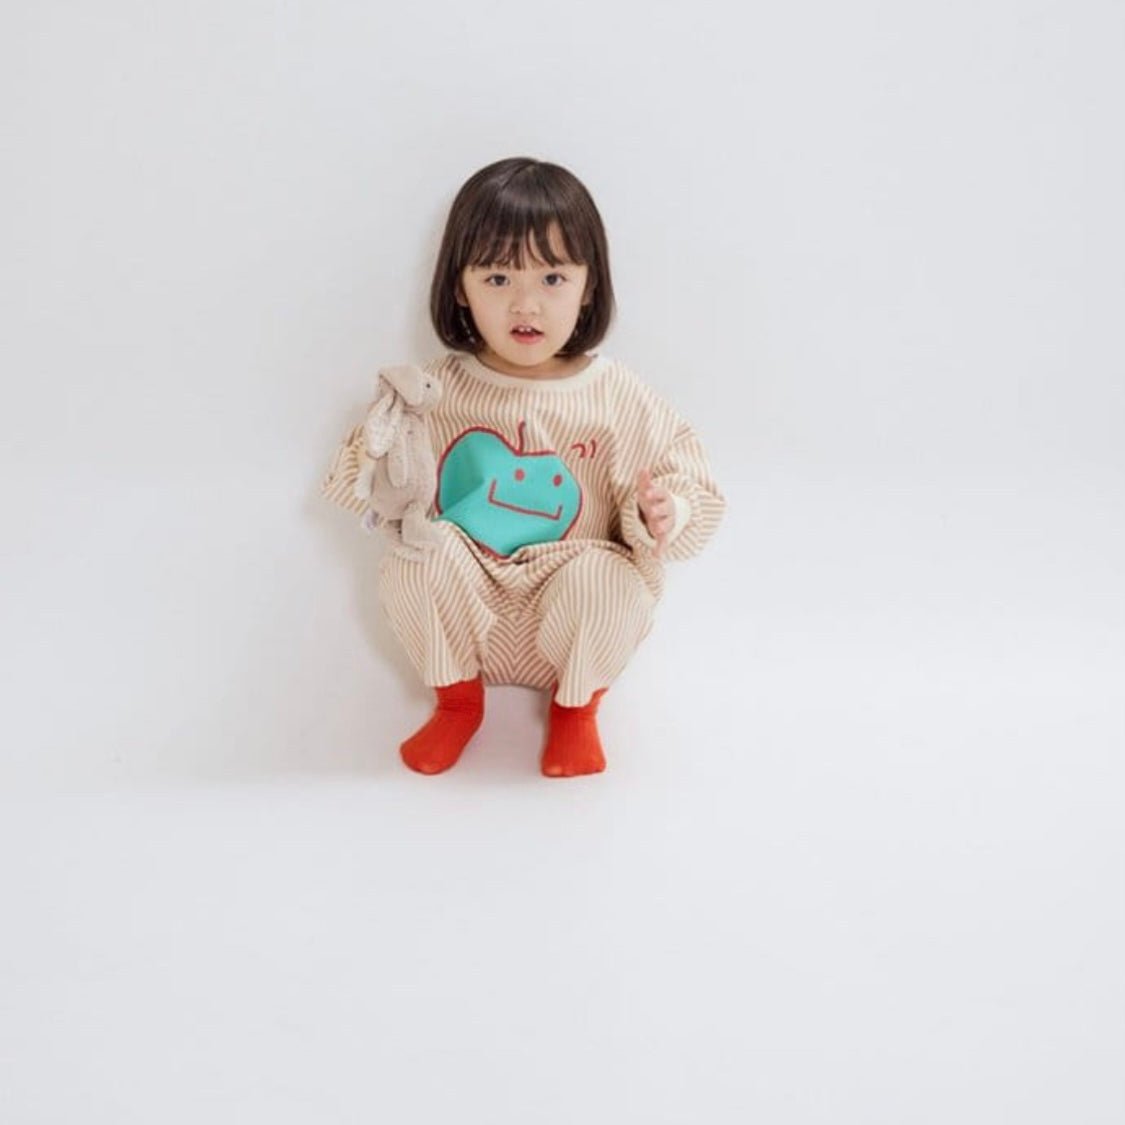 Cielo Pants find Stylish Fashion for Little People- at Little Foxx Concept Store